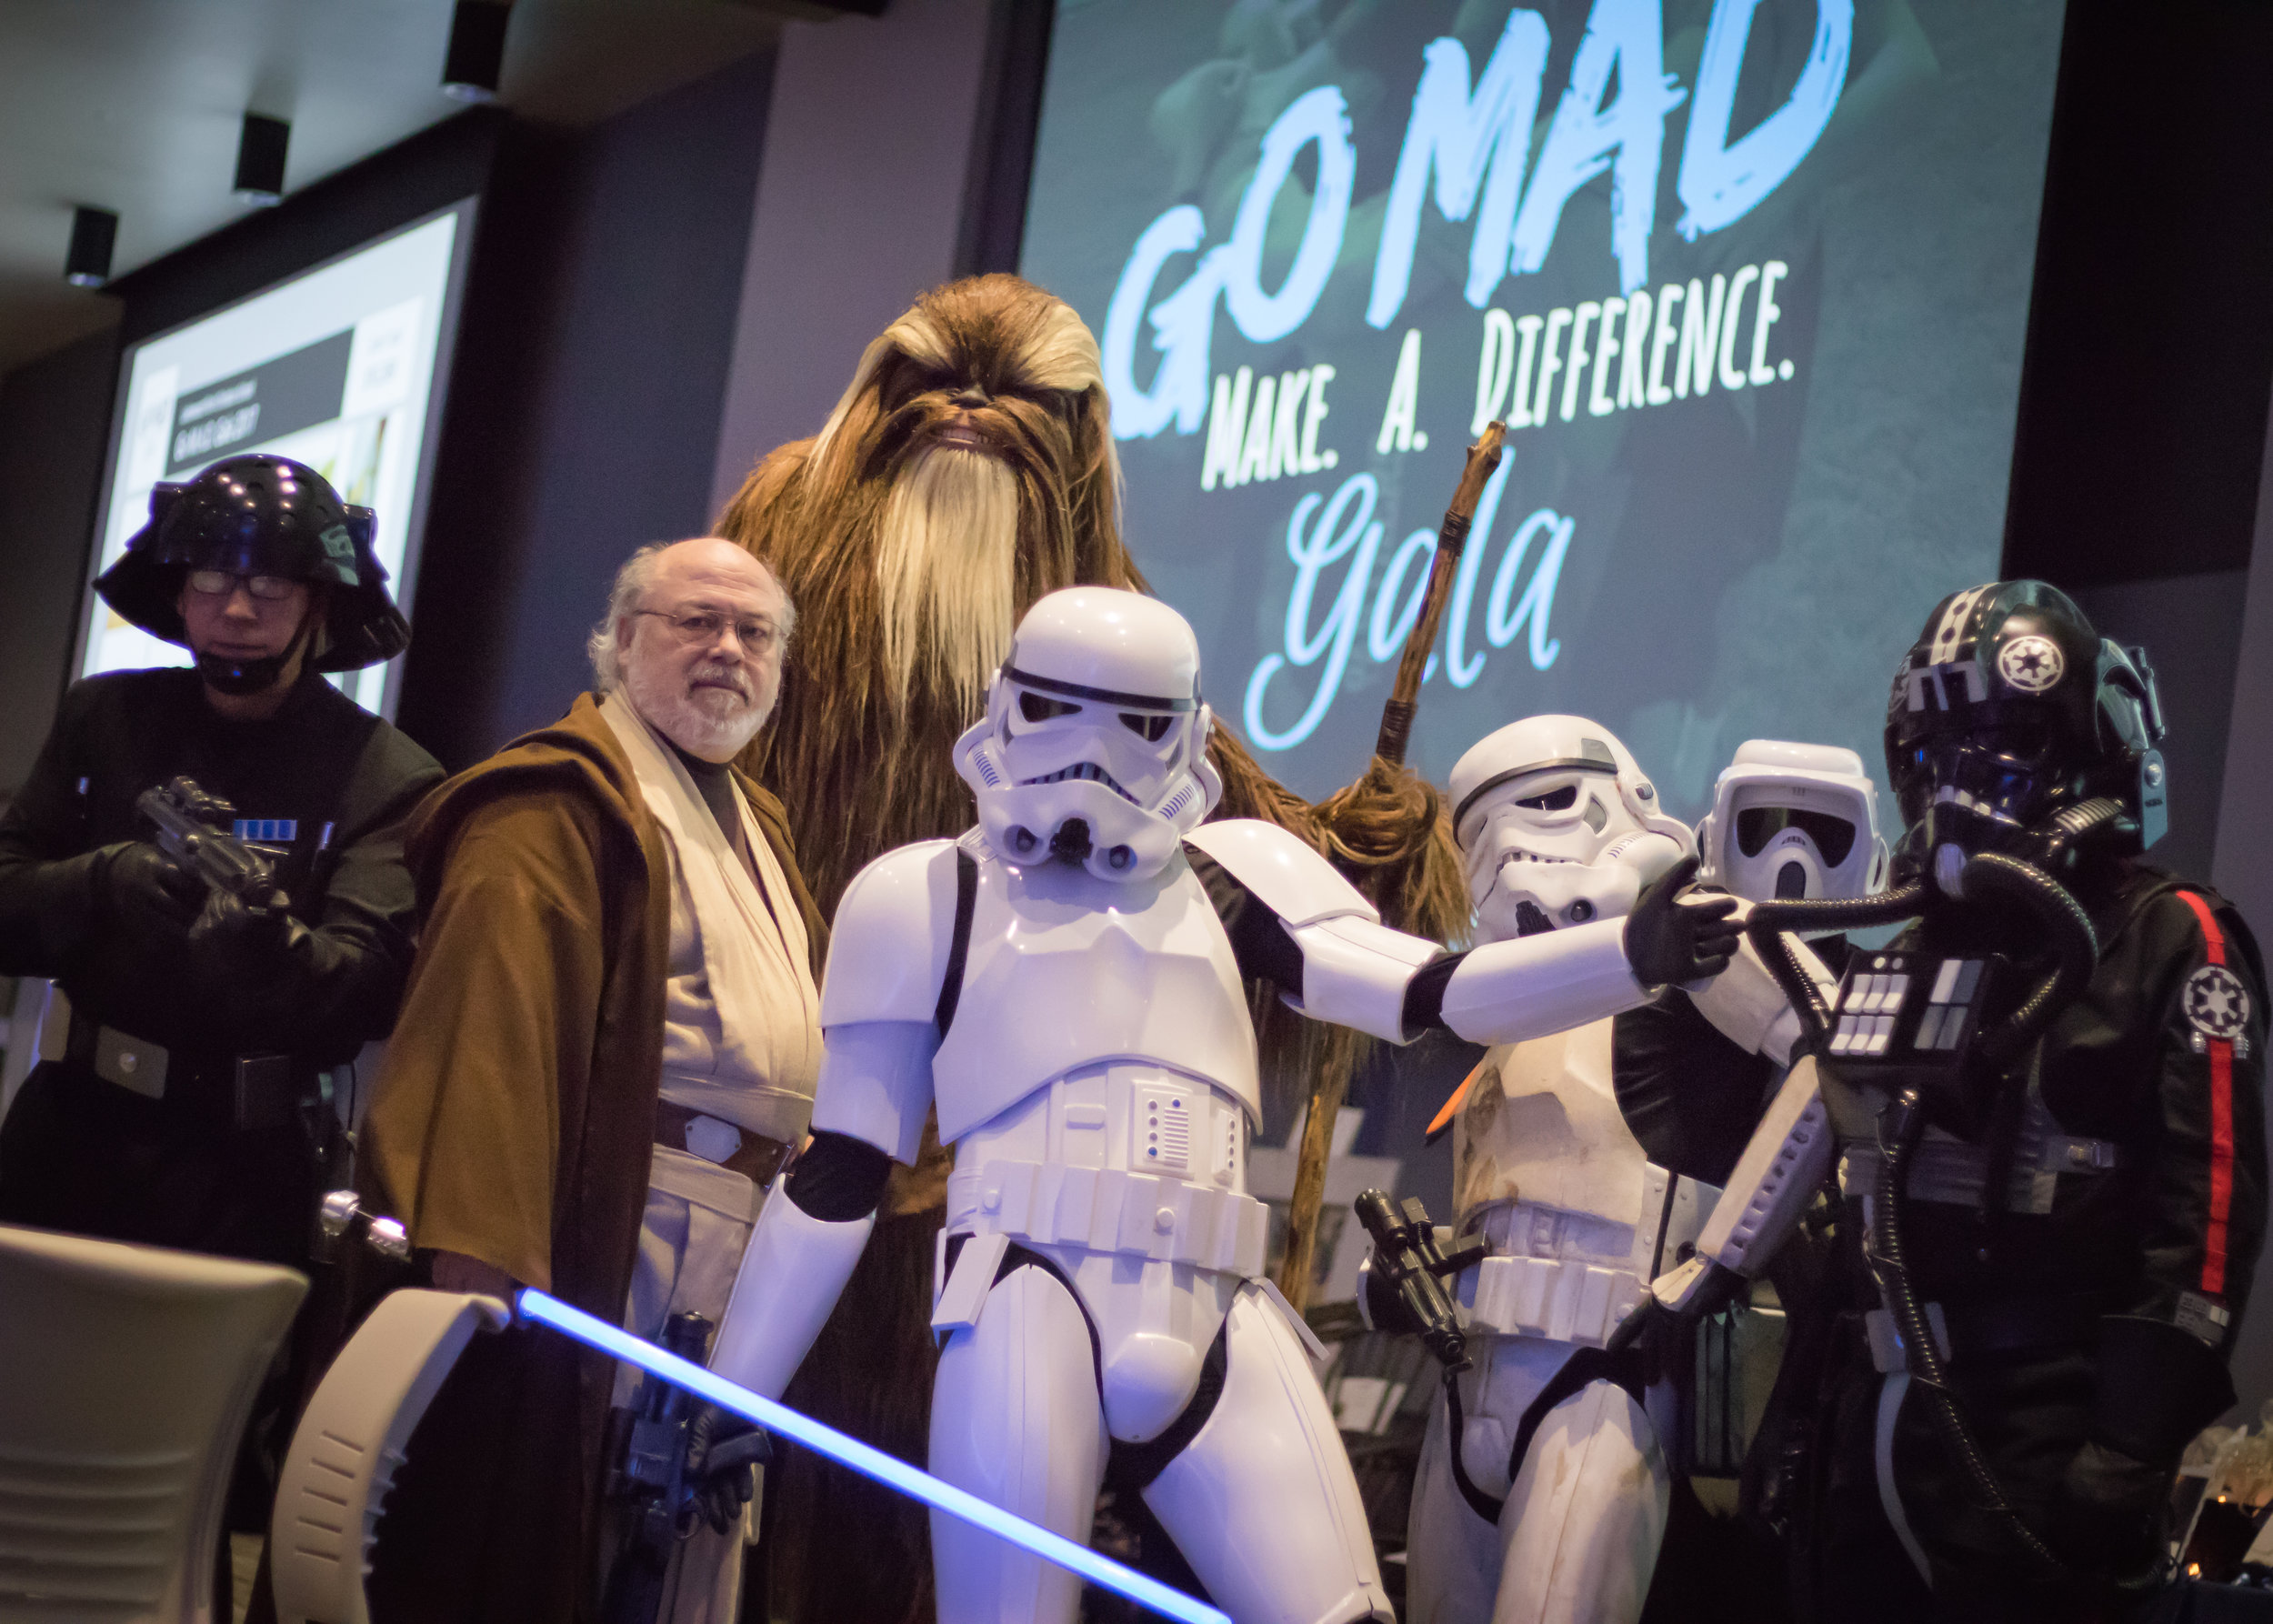  Go MAD Gala Fundraiser &amp; Auction (with 501st NDG), Parkview Mirro Center for Research and Innovation, 2017 